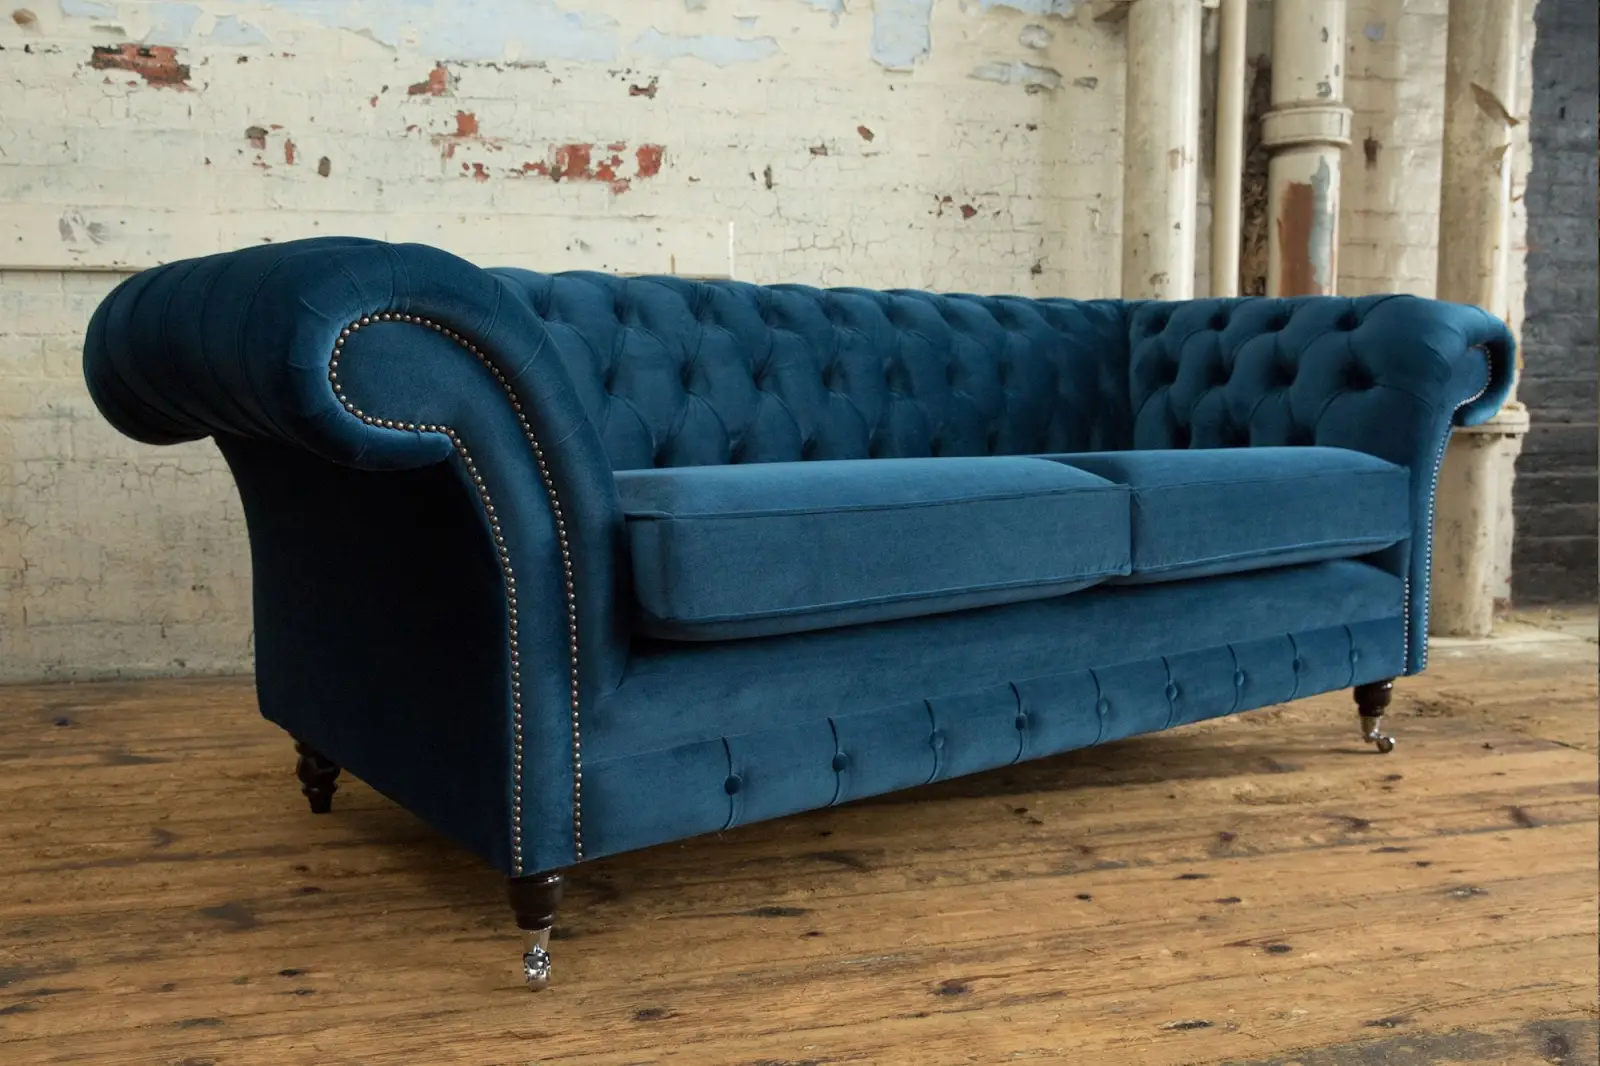 Chesterfield Sofa Meaning